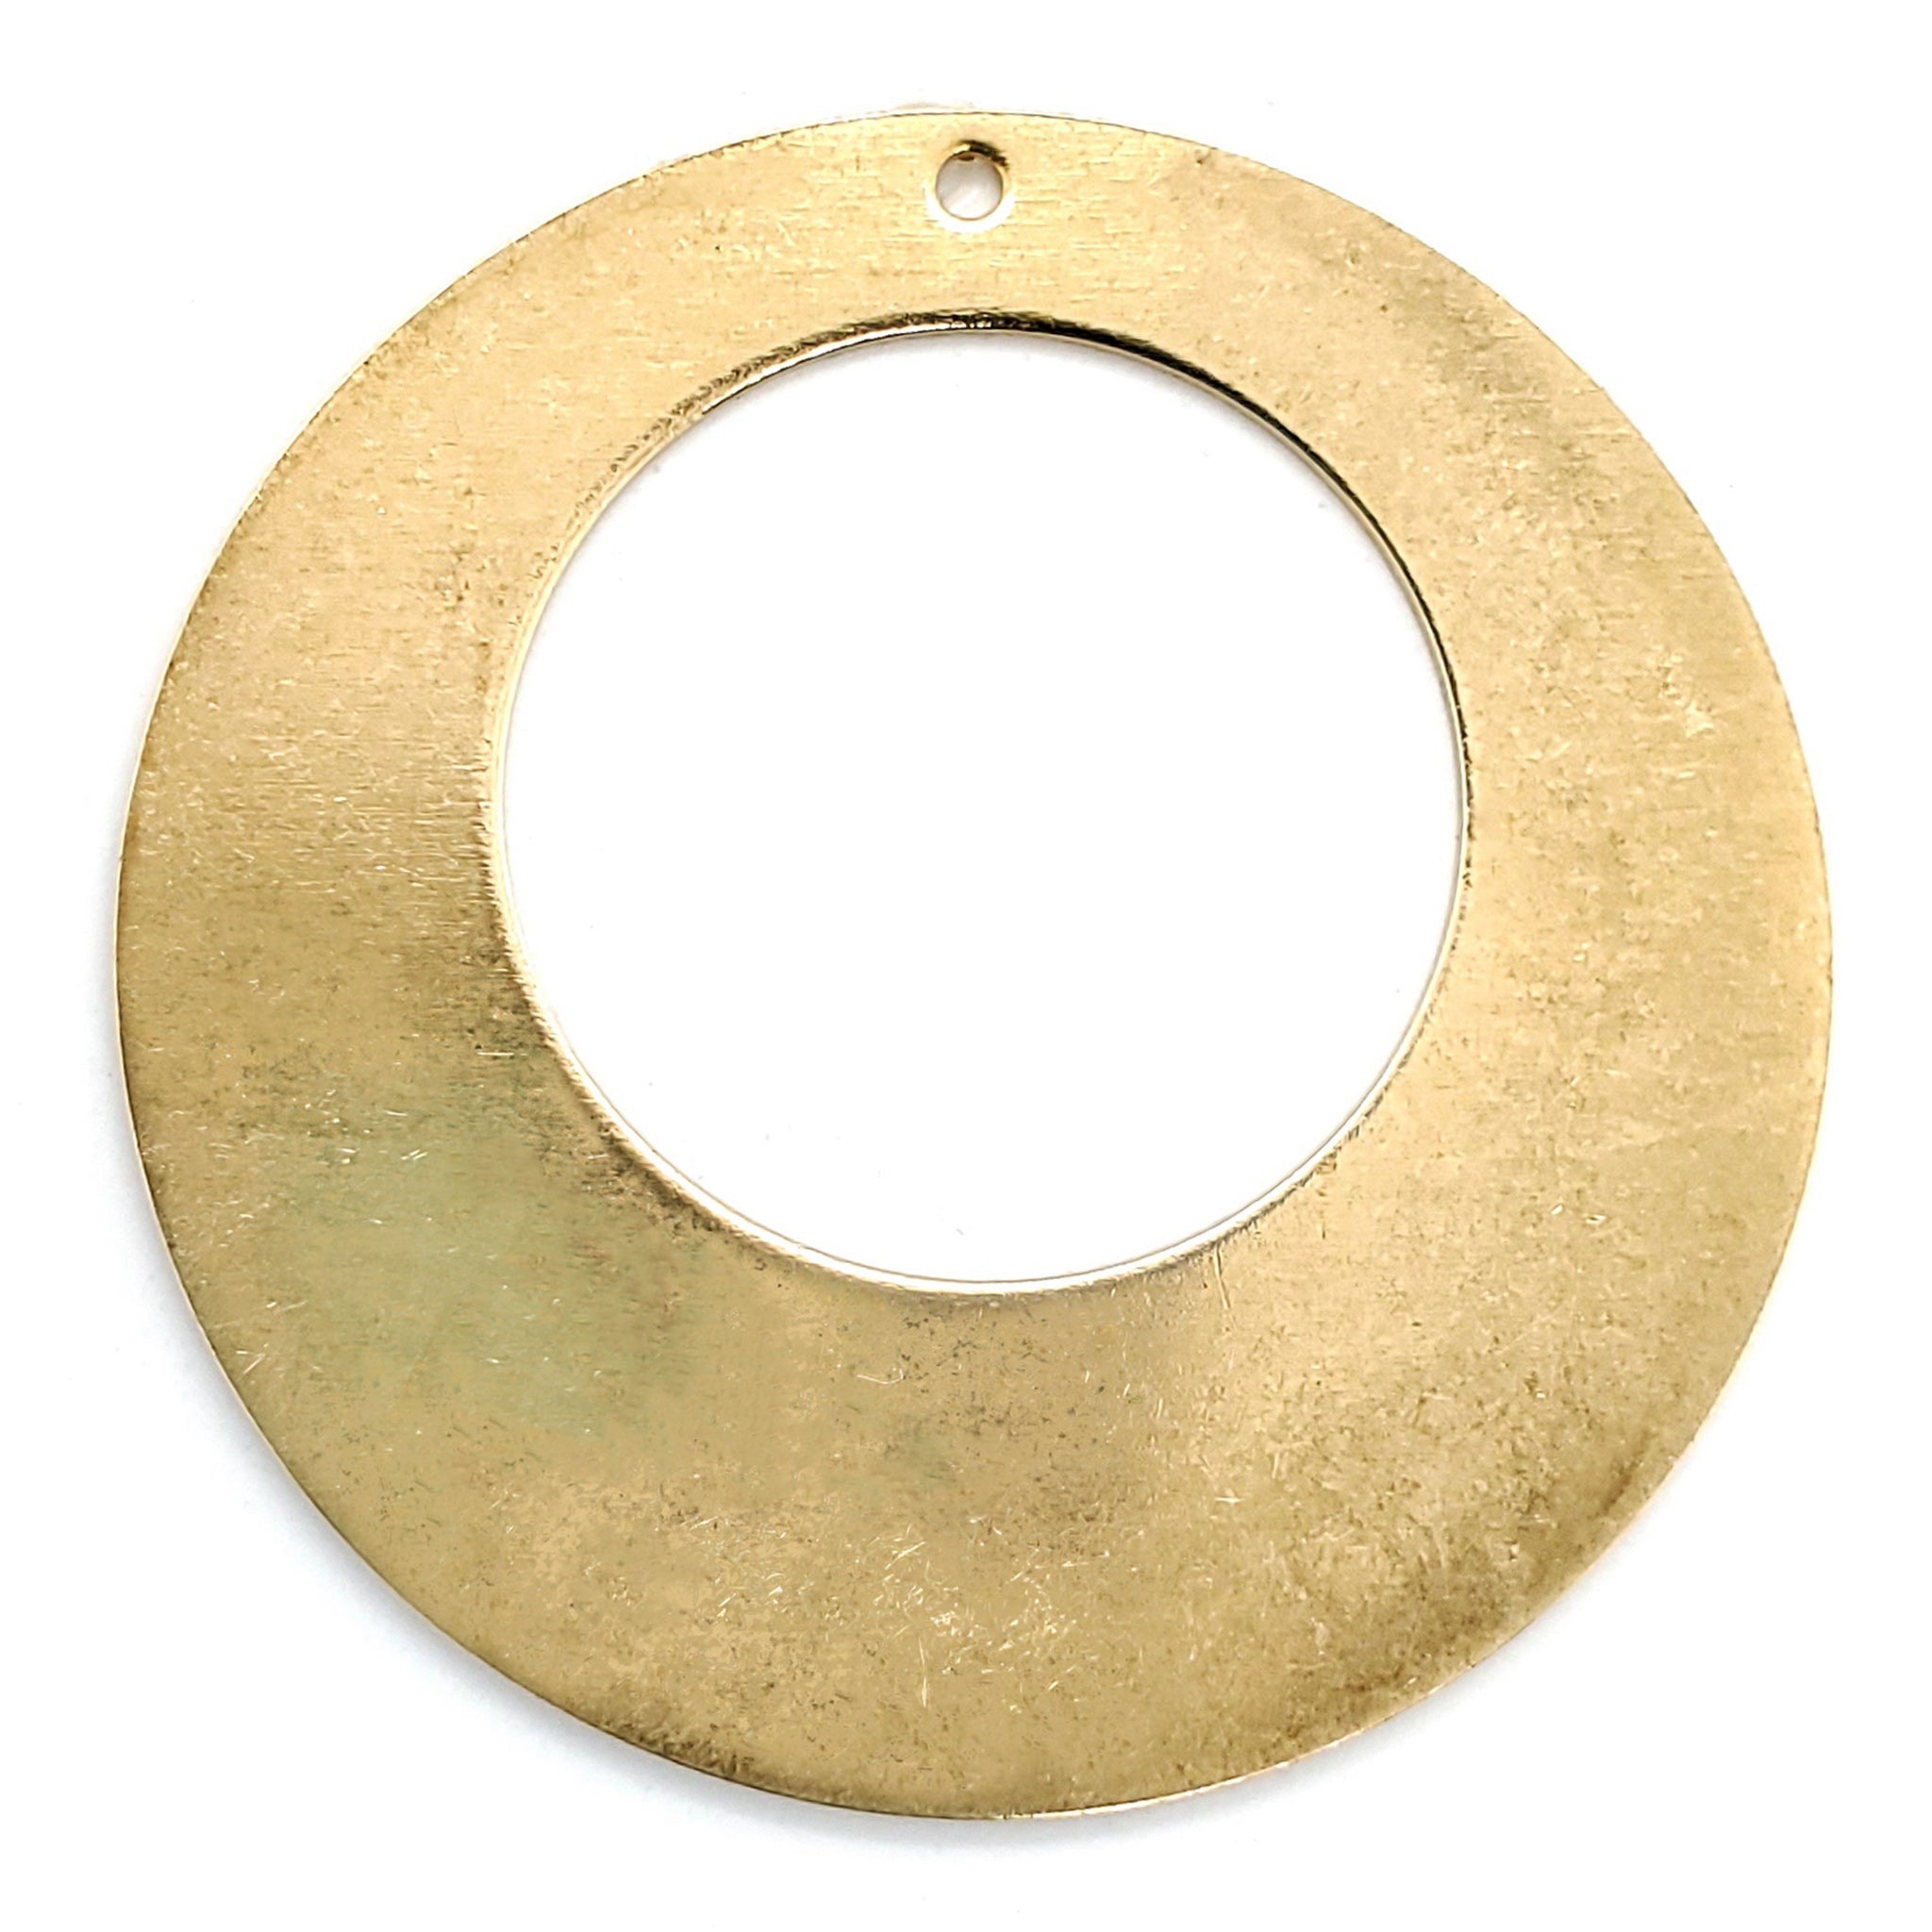 Brass Blank Offset Washer Pendant With Hole / SBB0222-is brass jewelry good- kendra scott large antique brass jewelry box- cleaning brass jewelry- brass ring jewelry how to keep brass jewelry from tarnishing